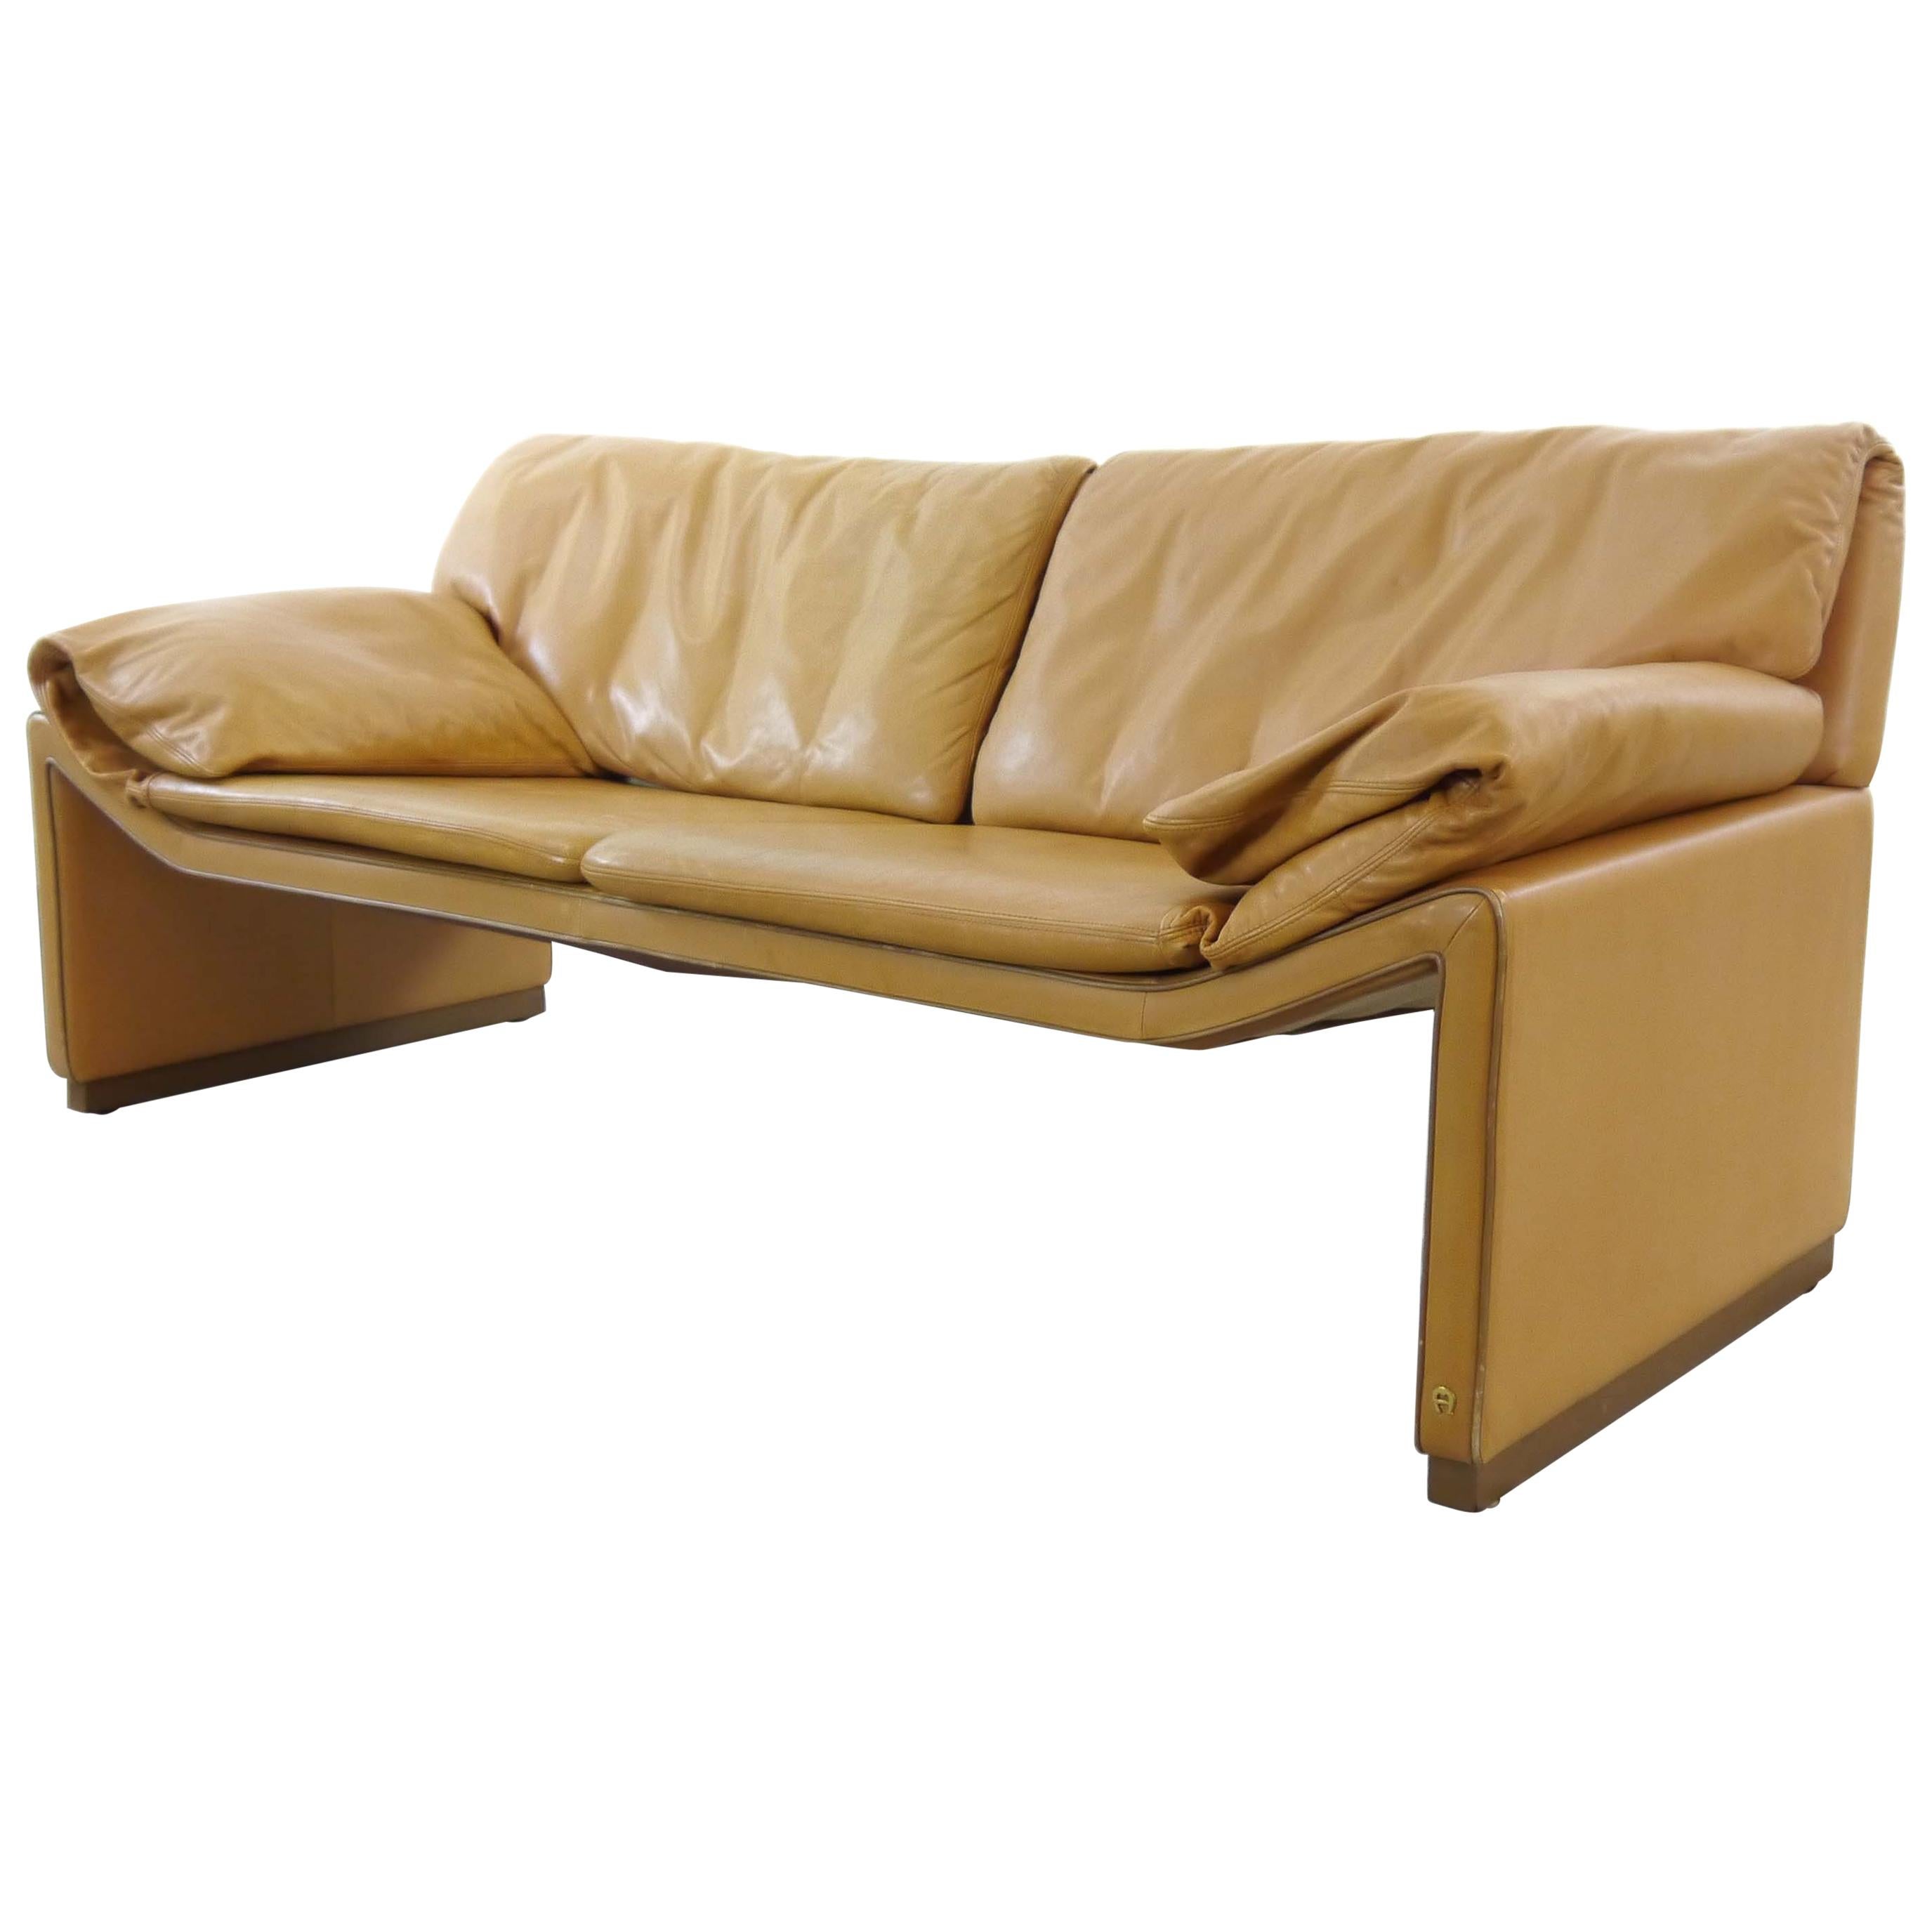 2-Seat Lounge Sofa by Etienne Aigner in Cognac Leather